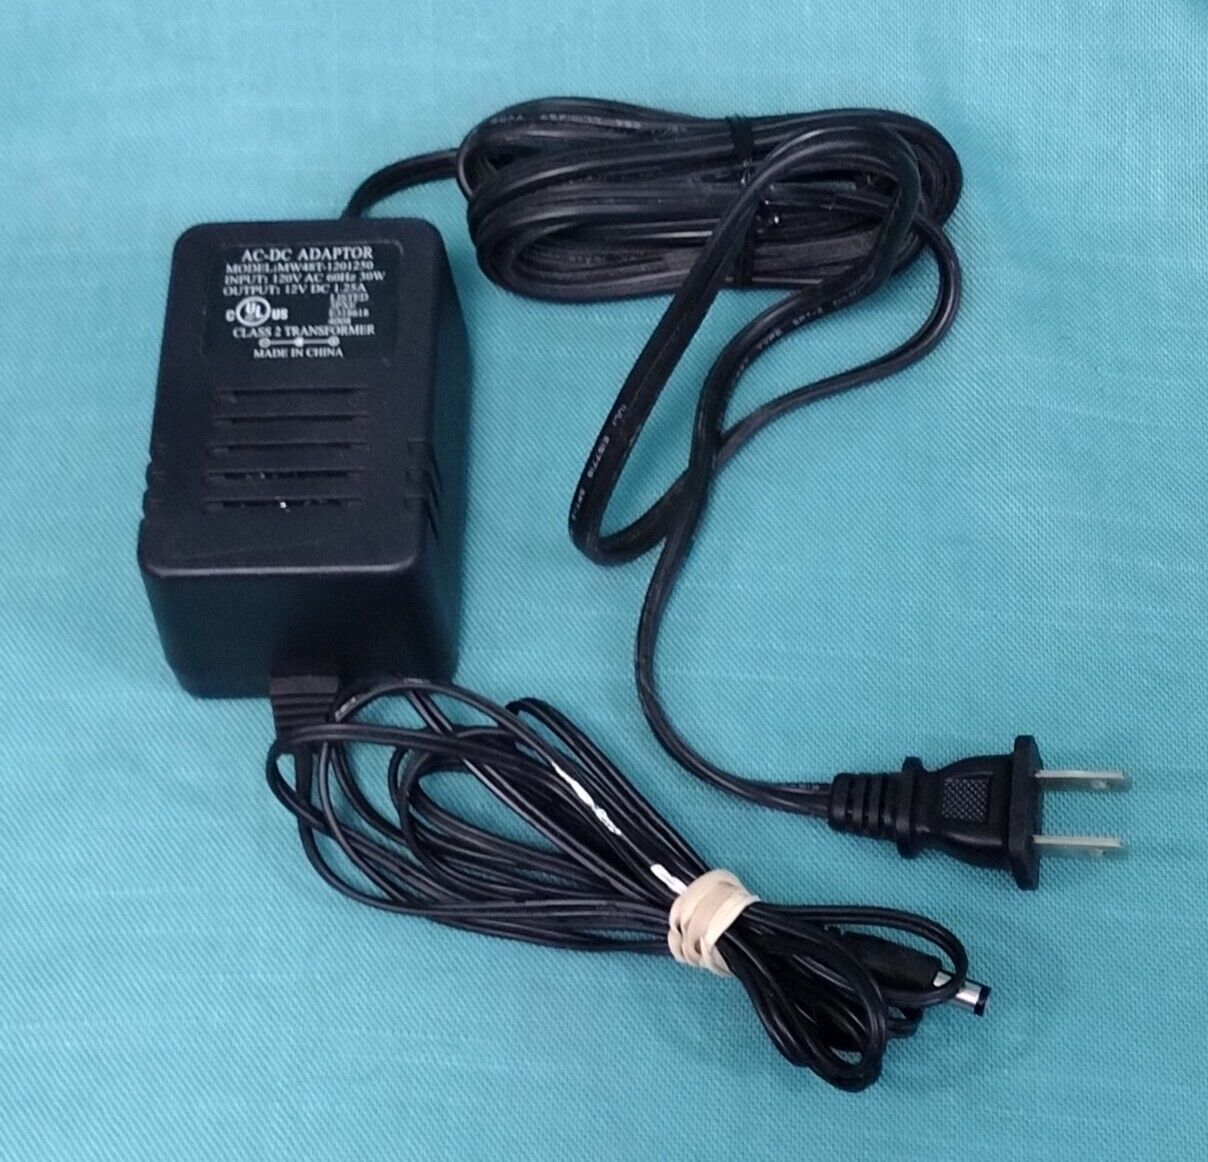 *Brand NEW*Generic MW48T-1201250 Output 12V DC 1.25A AC-DC Adaptor TESTED Work Power Supply